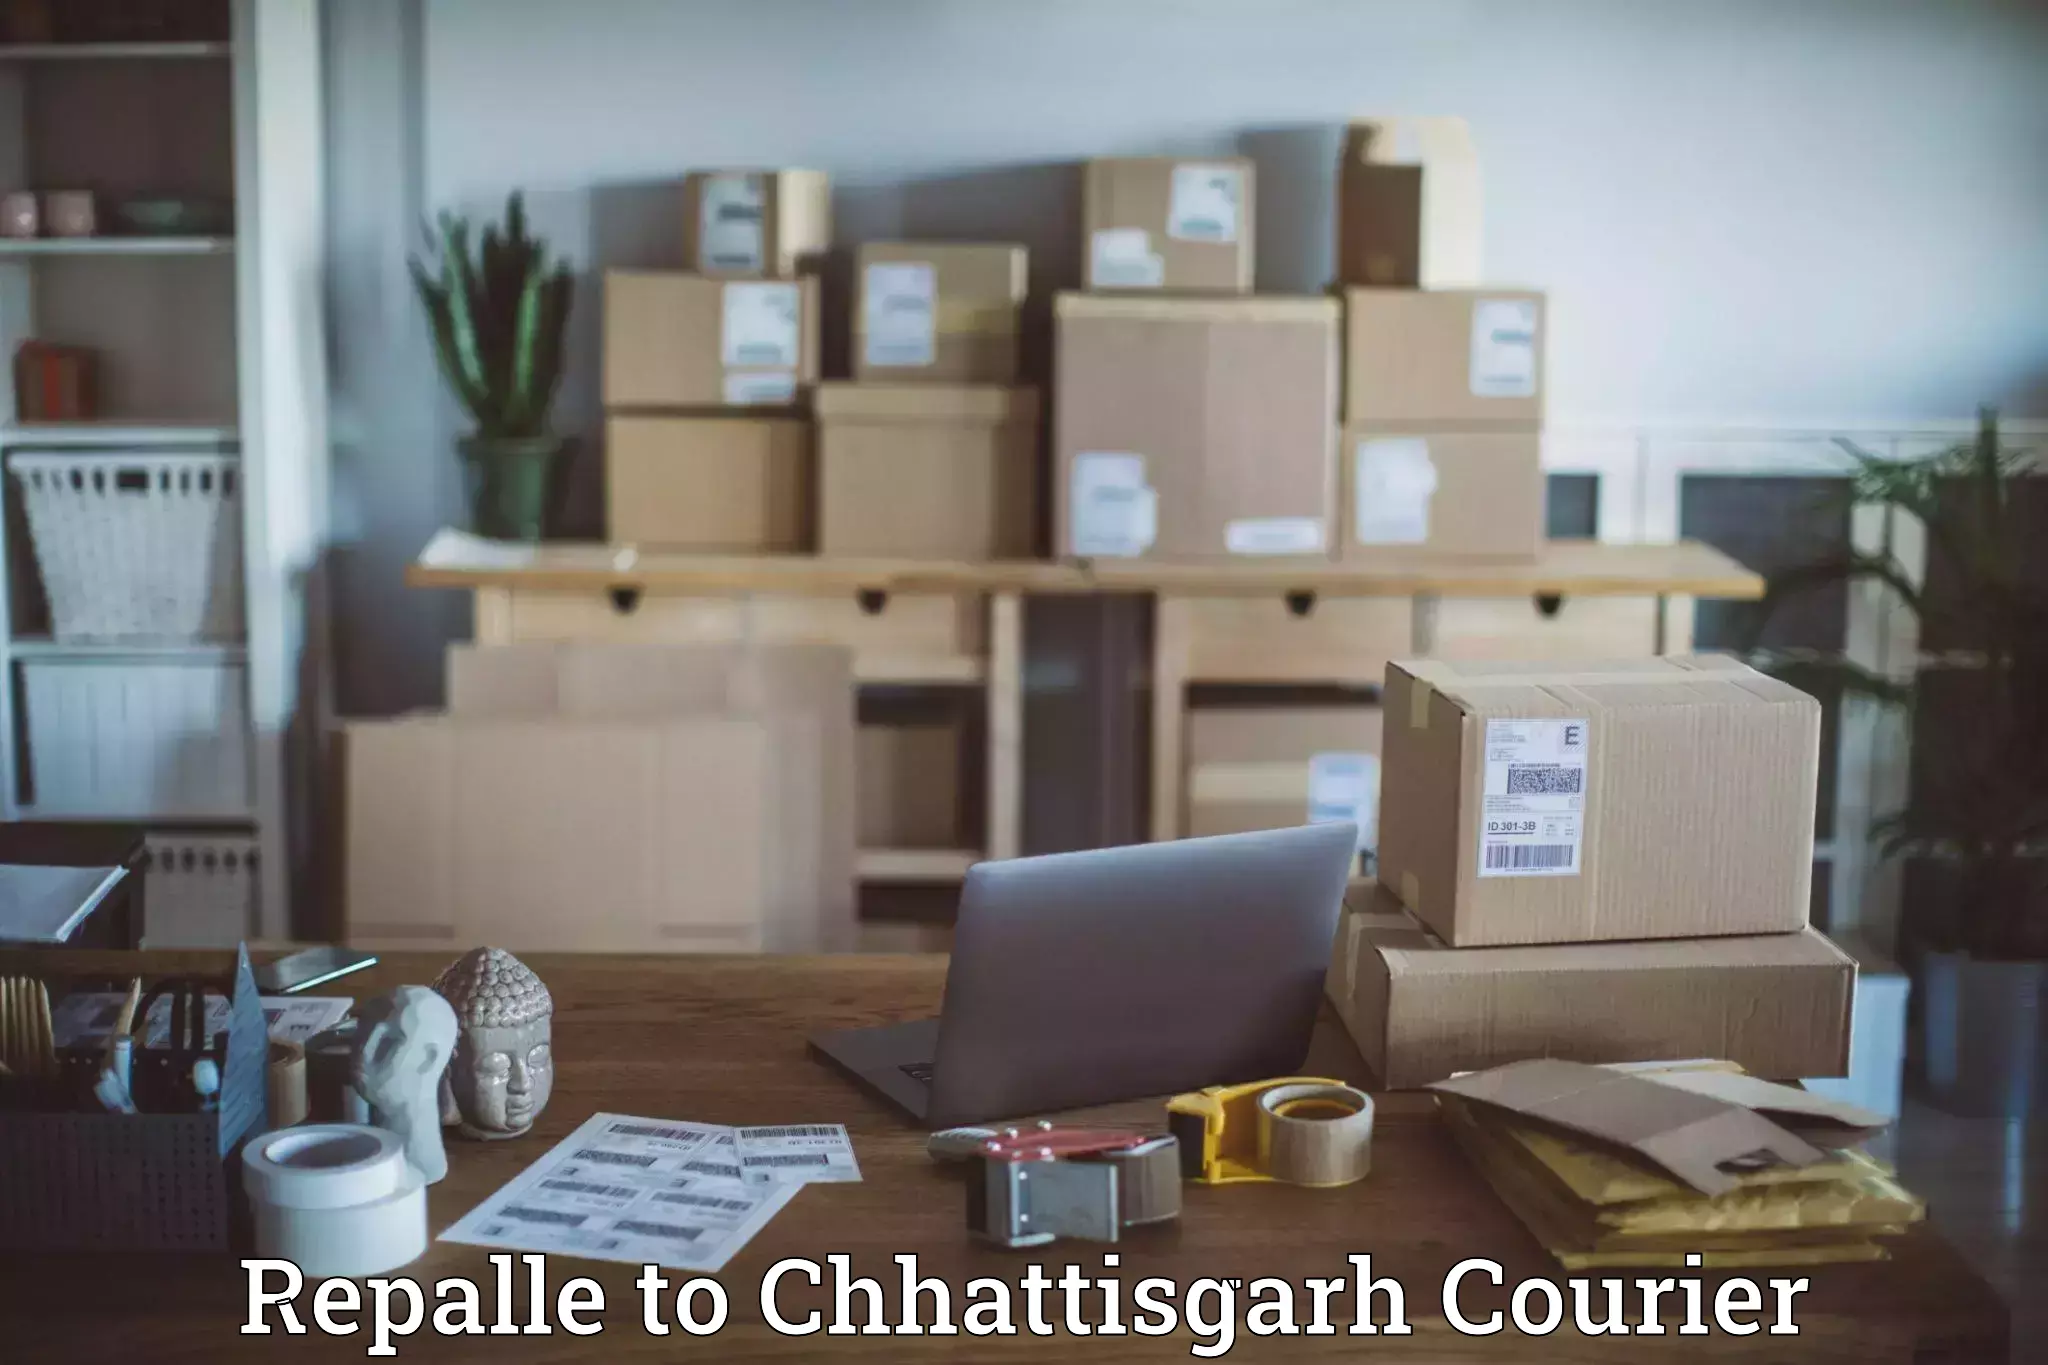 Large package courier Repalle to Premnagar